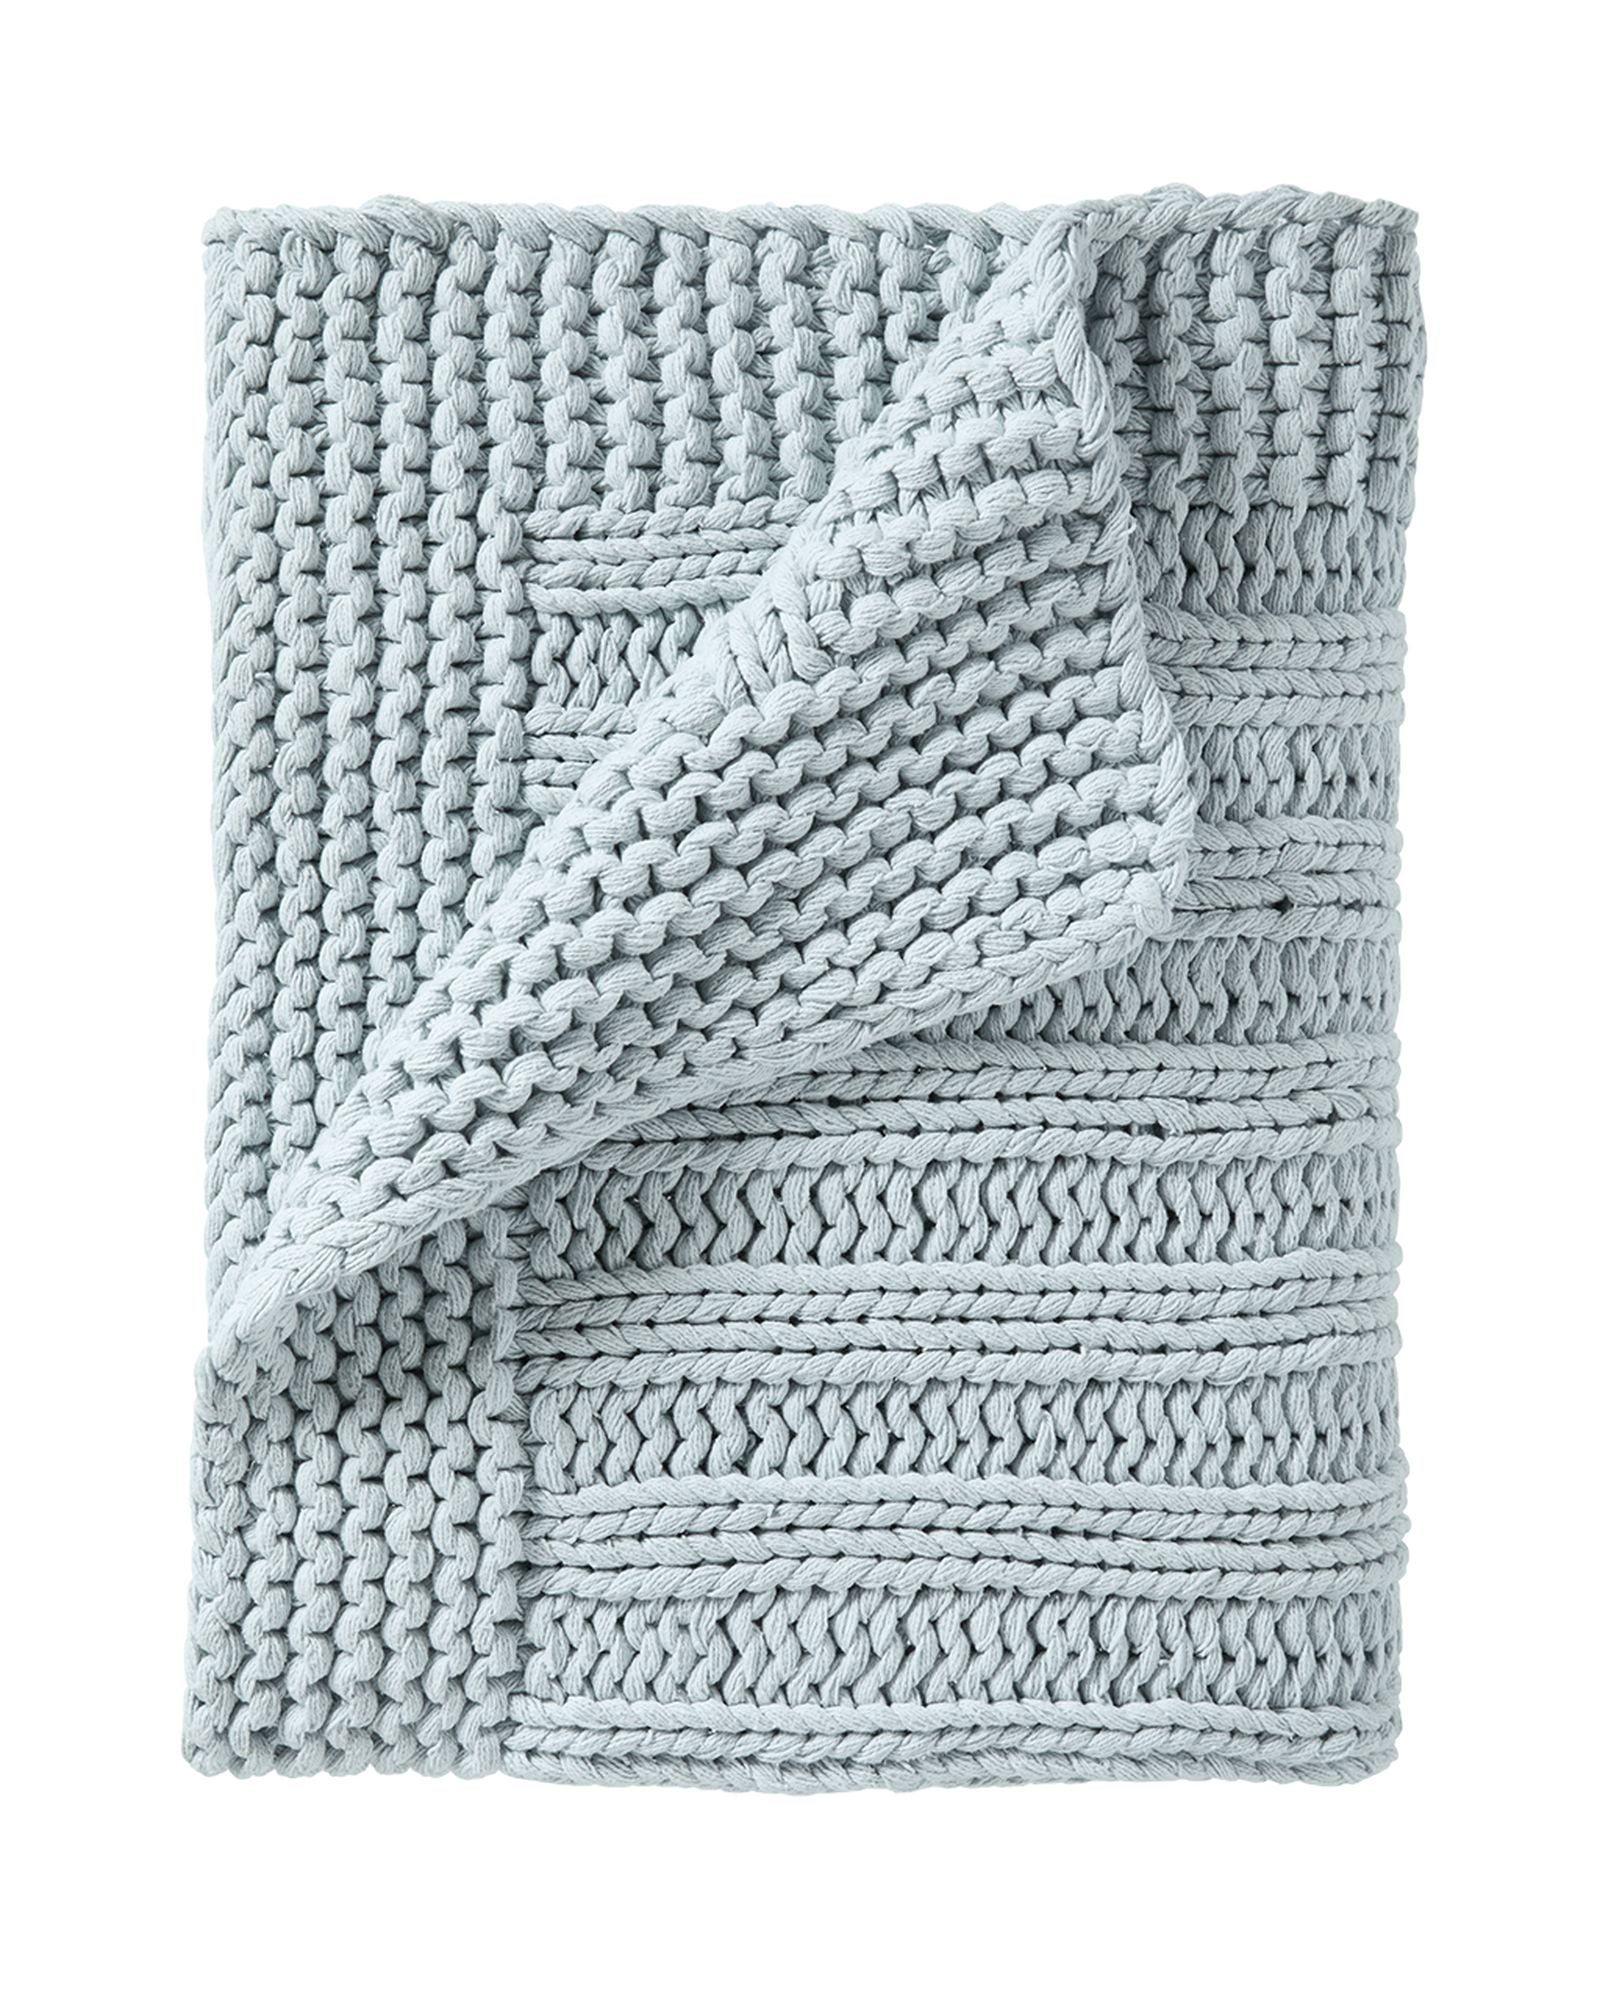 Sequoia Cotton Throw | Serena and Lily